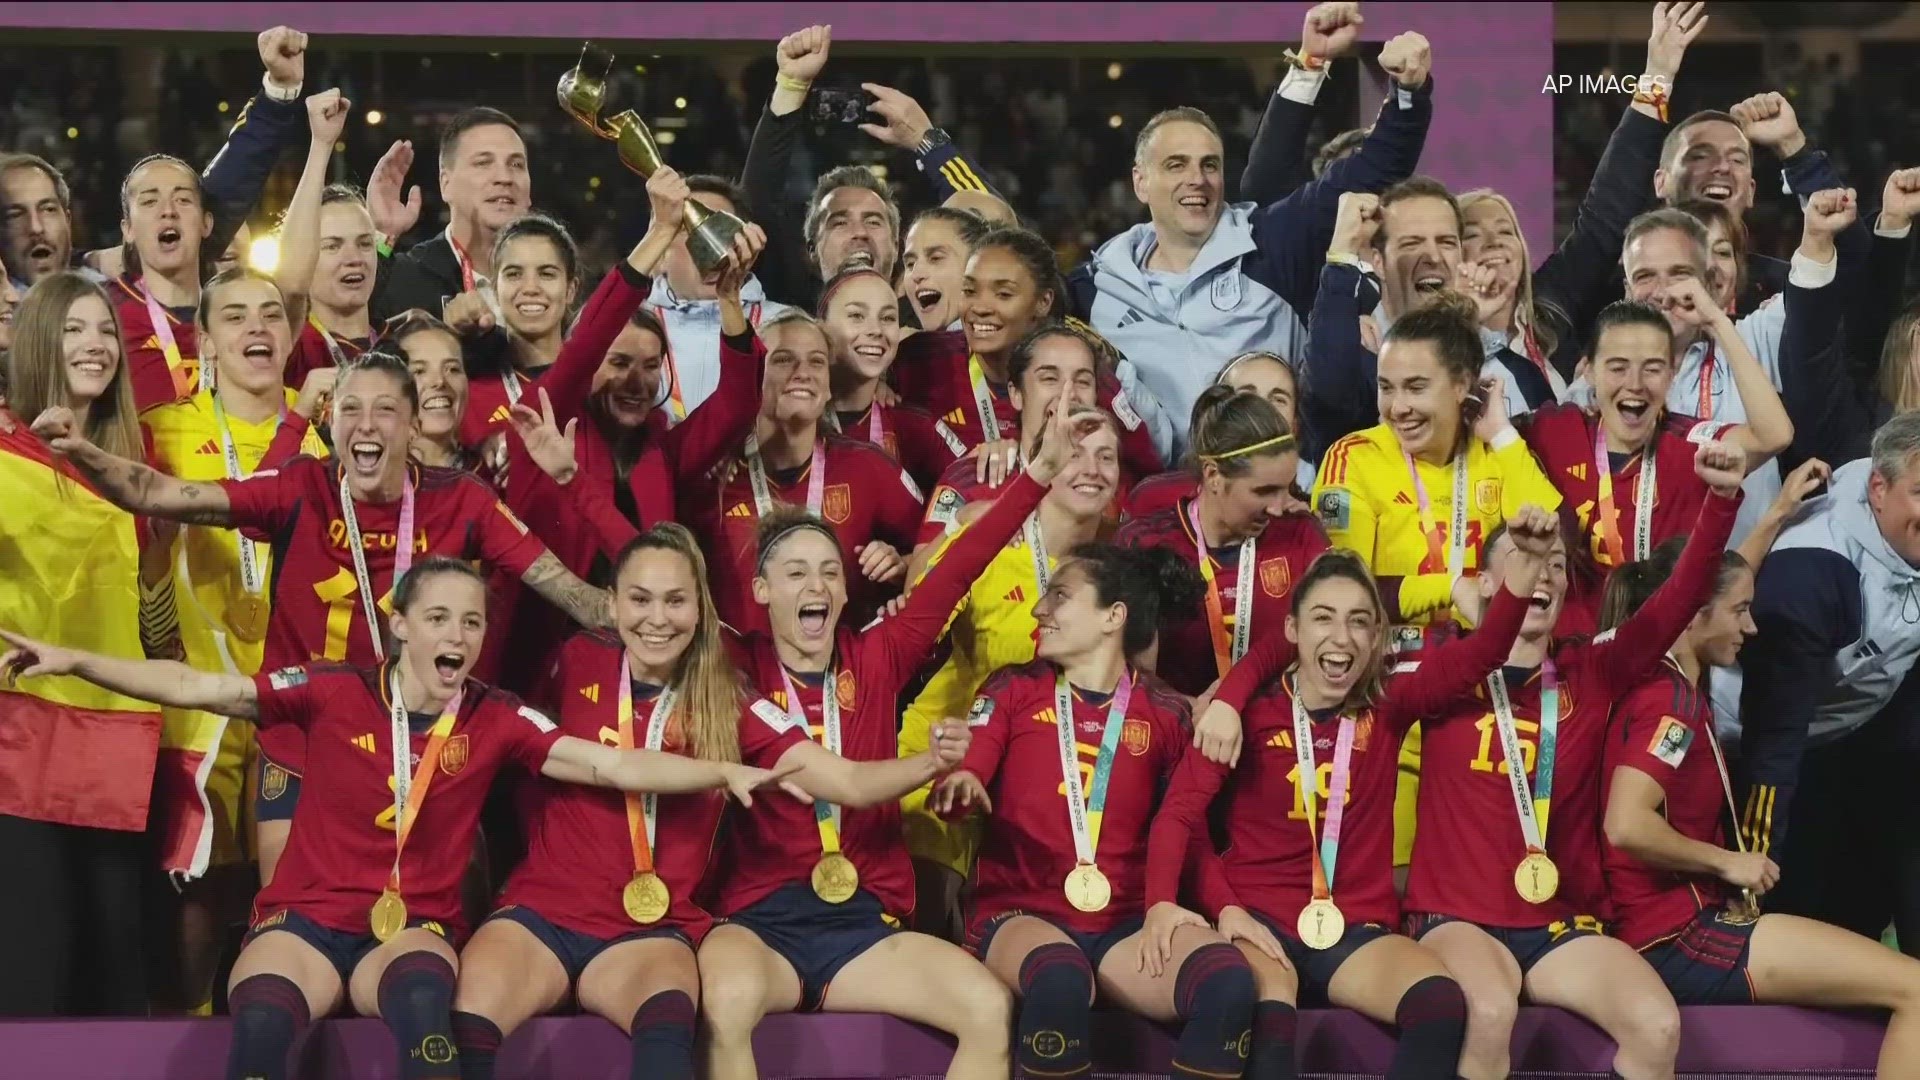 This is the club's first ever Women's World Cup win.